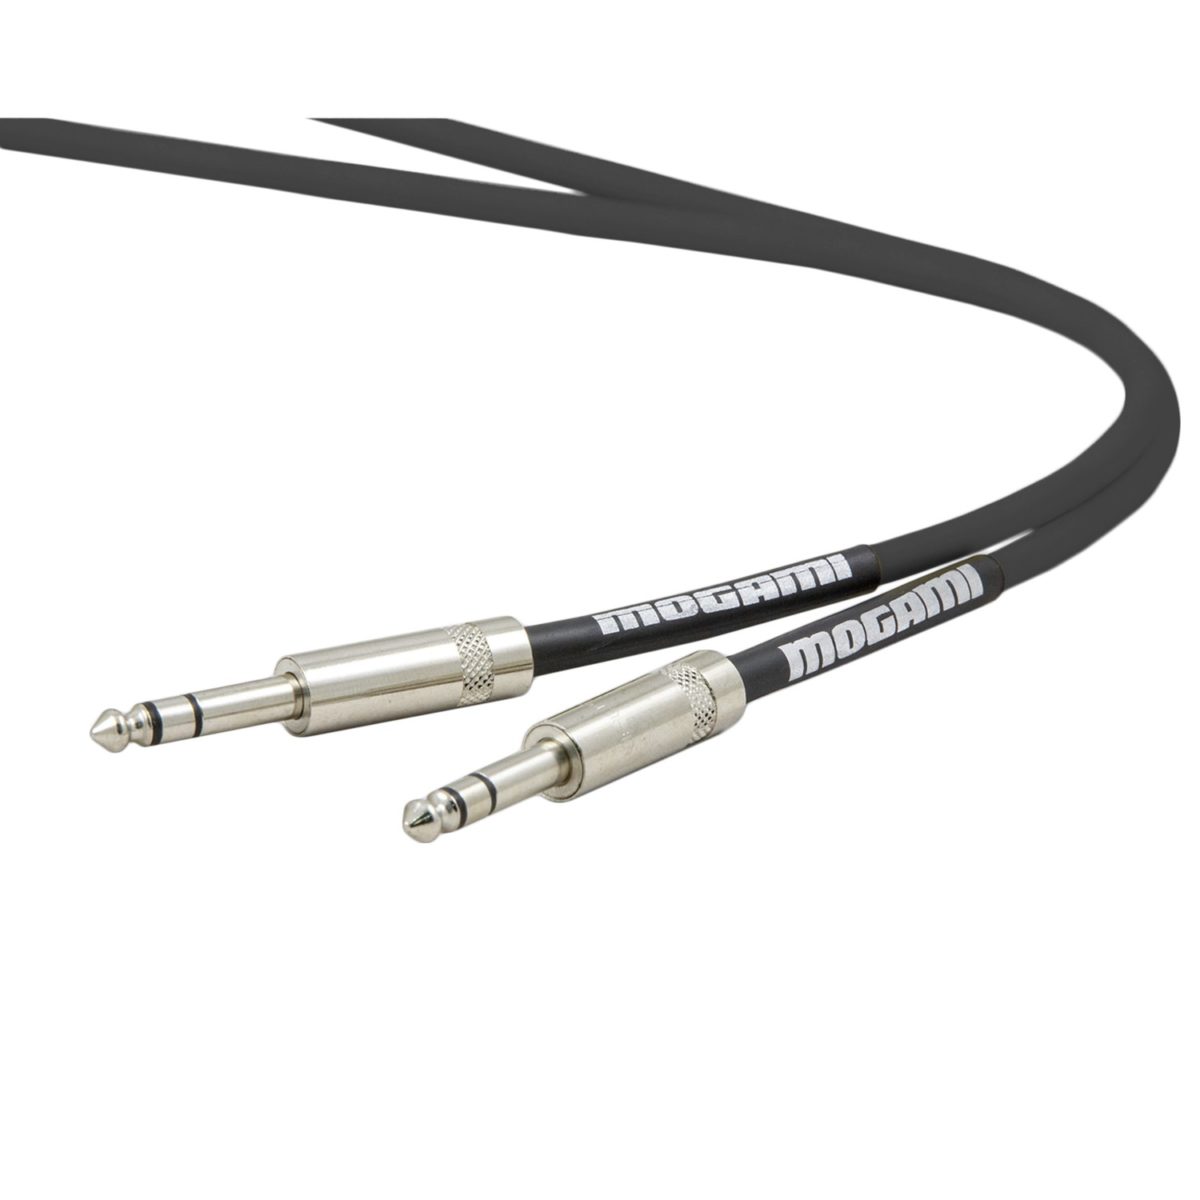 MOGAMI 2582 TR-TR Studio Accessory Cable uses the quality 2582